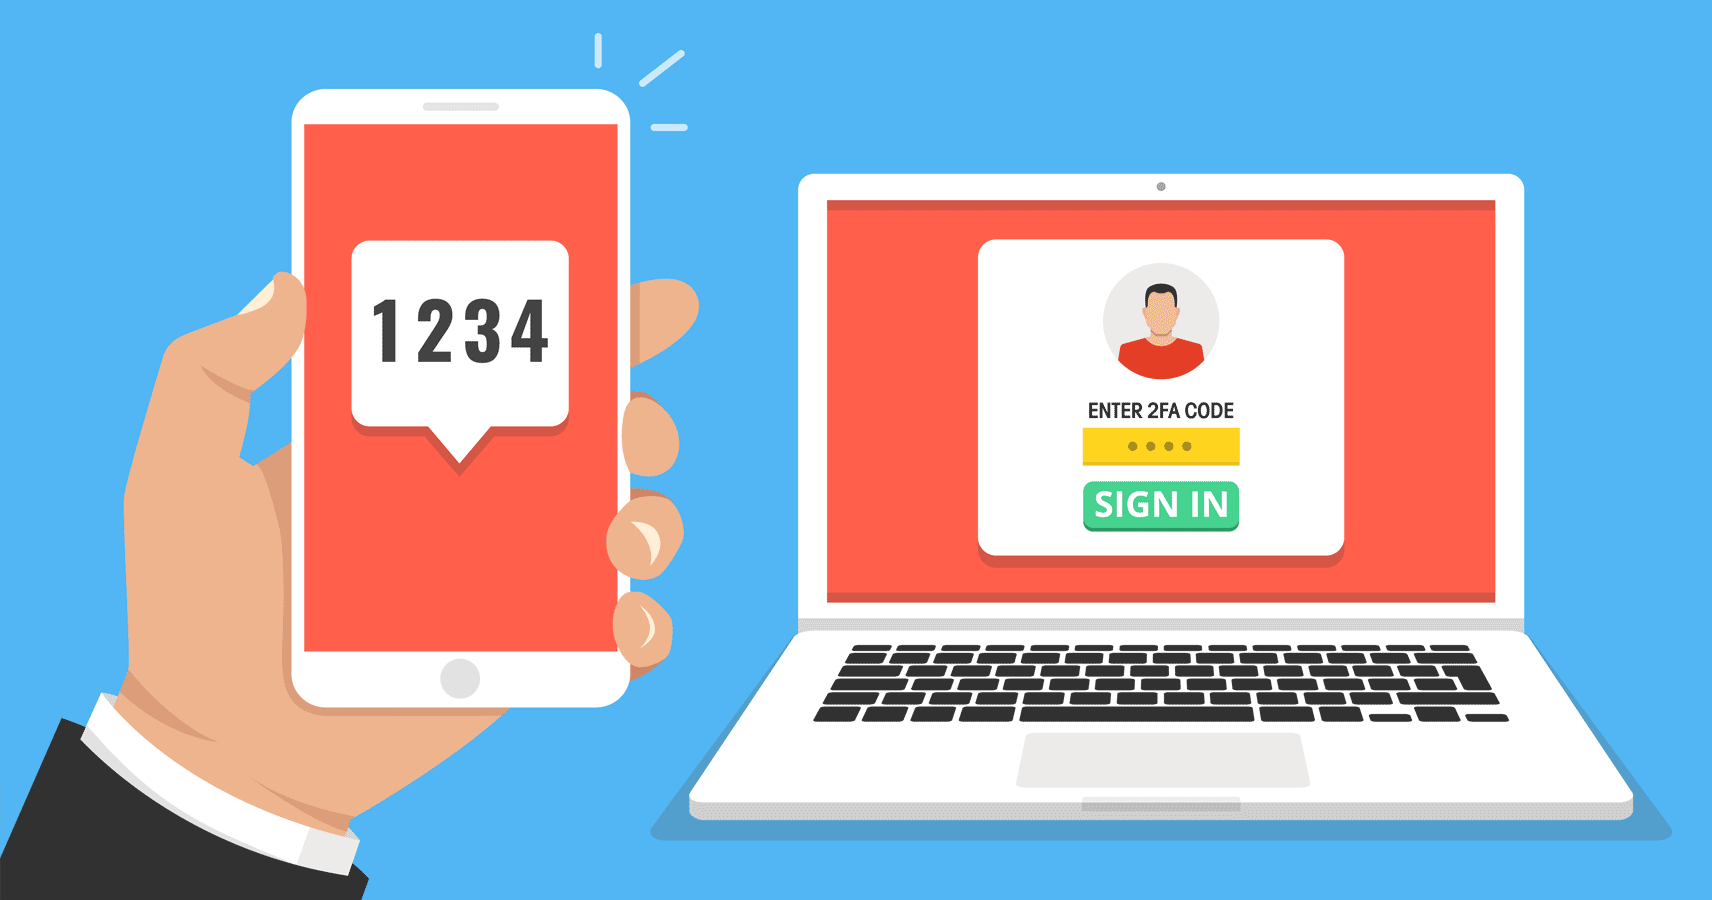 Secure your online accounts with two-factor authentication (2FA) for enhanced protection